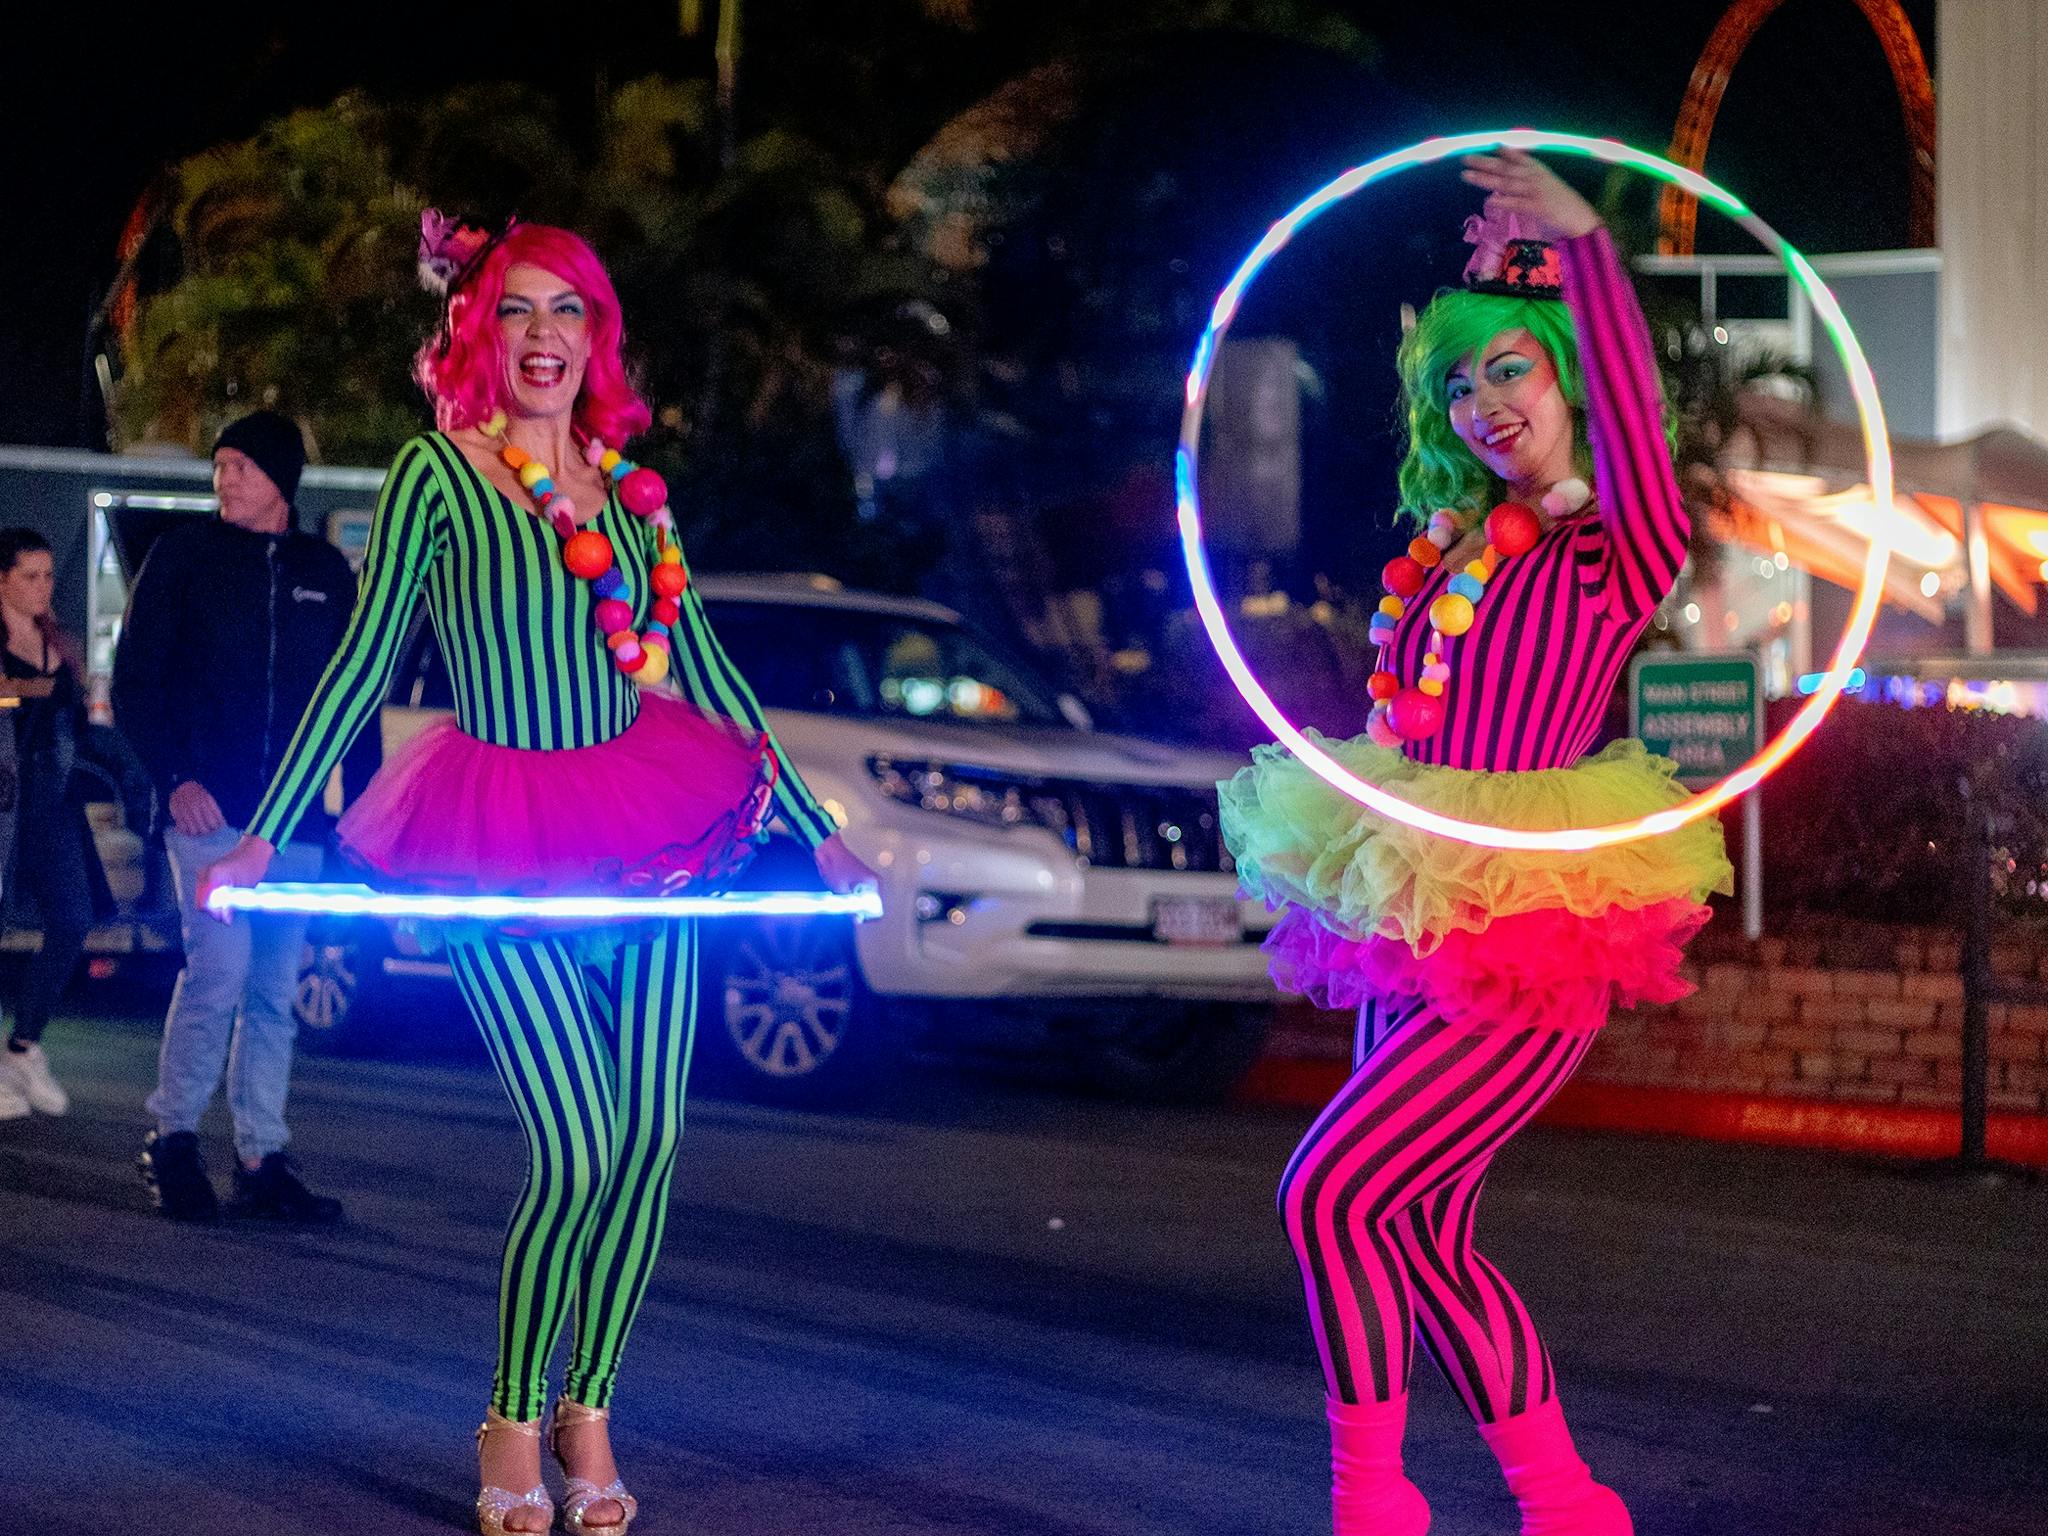 Glow entertainers at Moonlight Night market